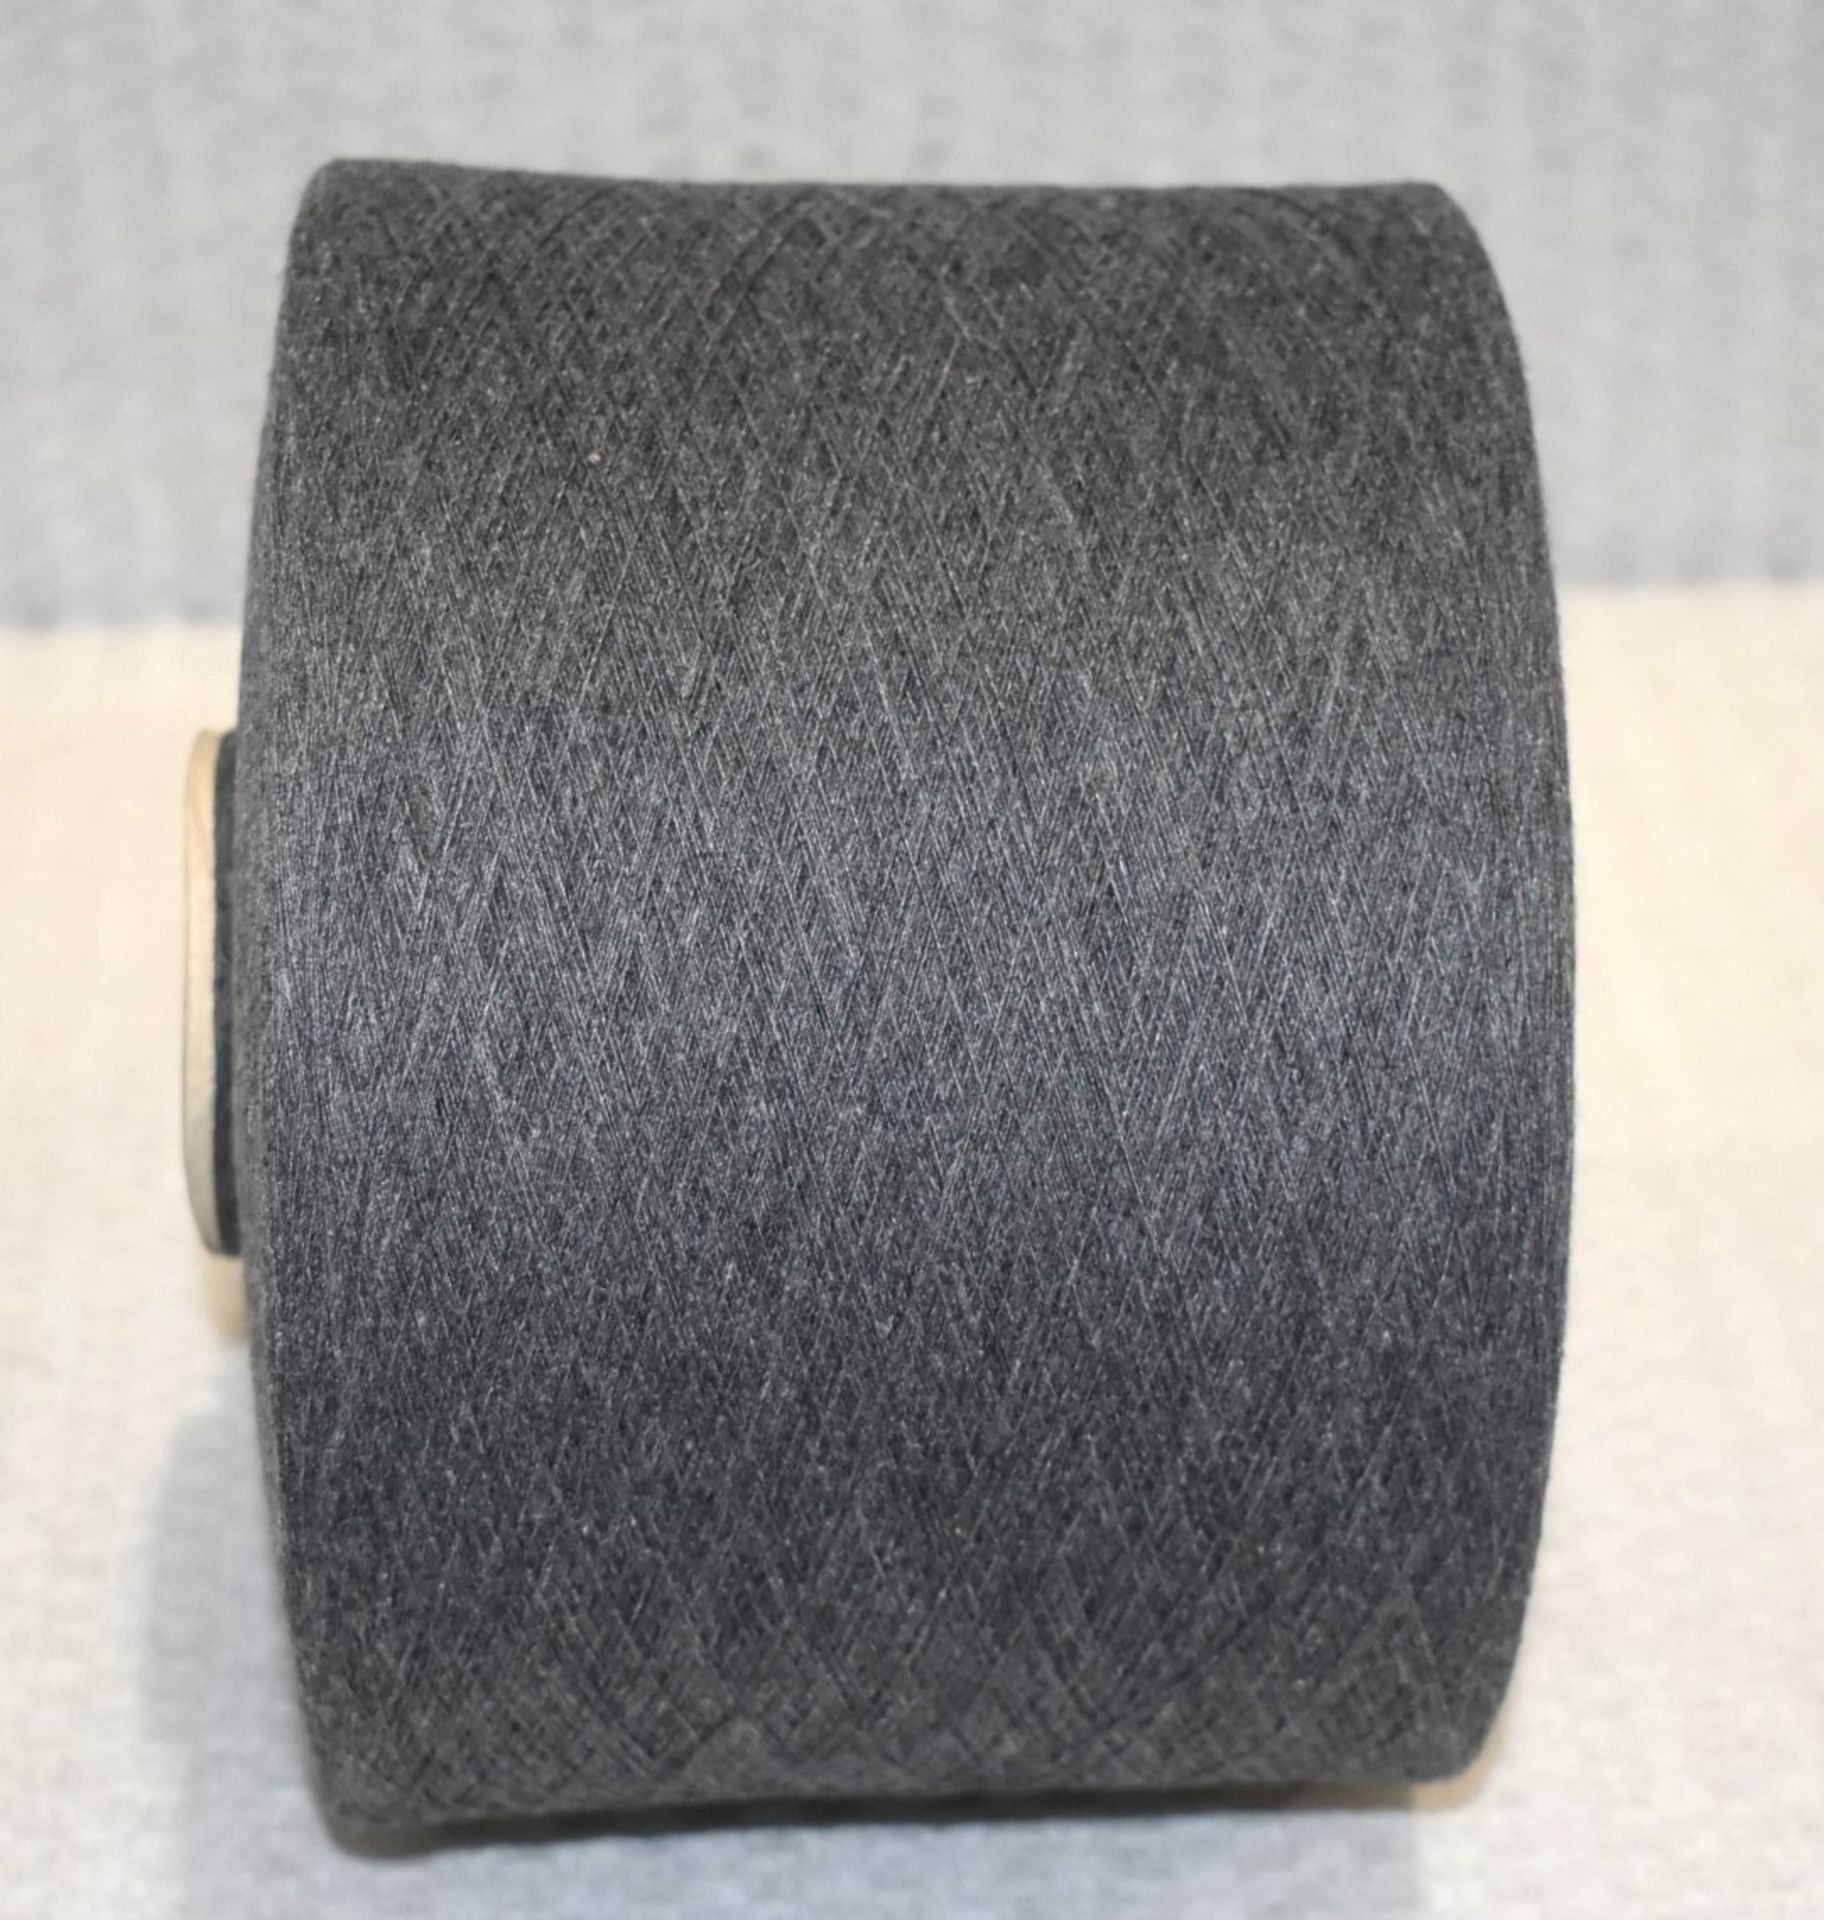 18 x Cones of 1/13 MicroCotton Knitting Yarn - Mid Grey - Approx Weight: 2,500g - New Stock ABL Yarn - Image 9 of 10